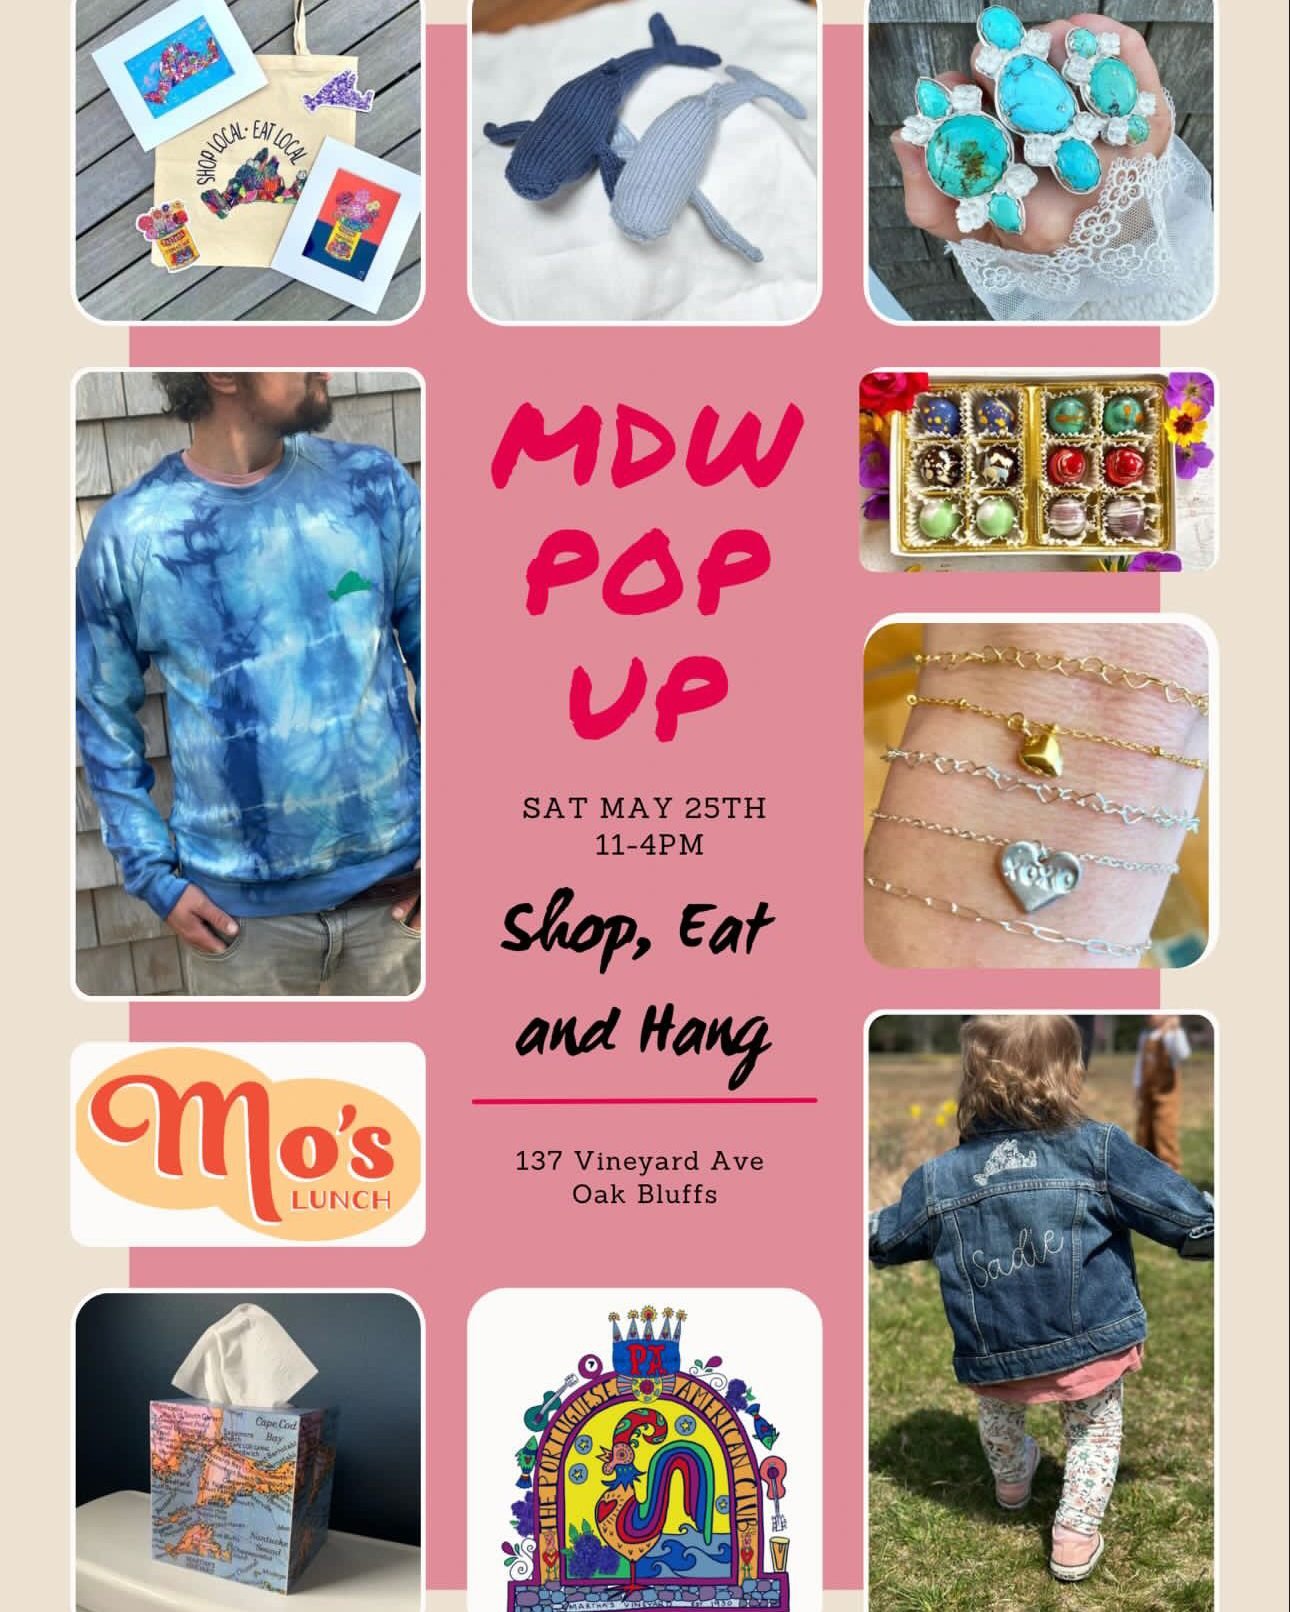 Save the date for the Memorial Day Weekend Popup! Saturday May 25th from 11 - 4pm. 

Your favorite local artisans and of course good food and drinks! Tell your friends, let&rsquo;s kick off the summer together! 

@mos.lunch 
@cinnamon.white 
@gillybm